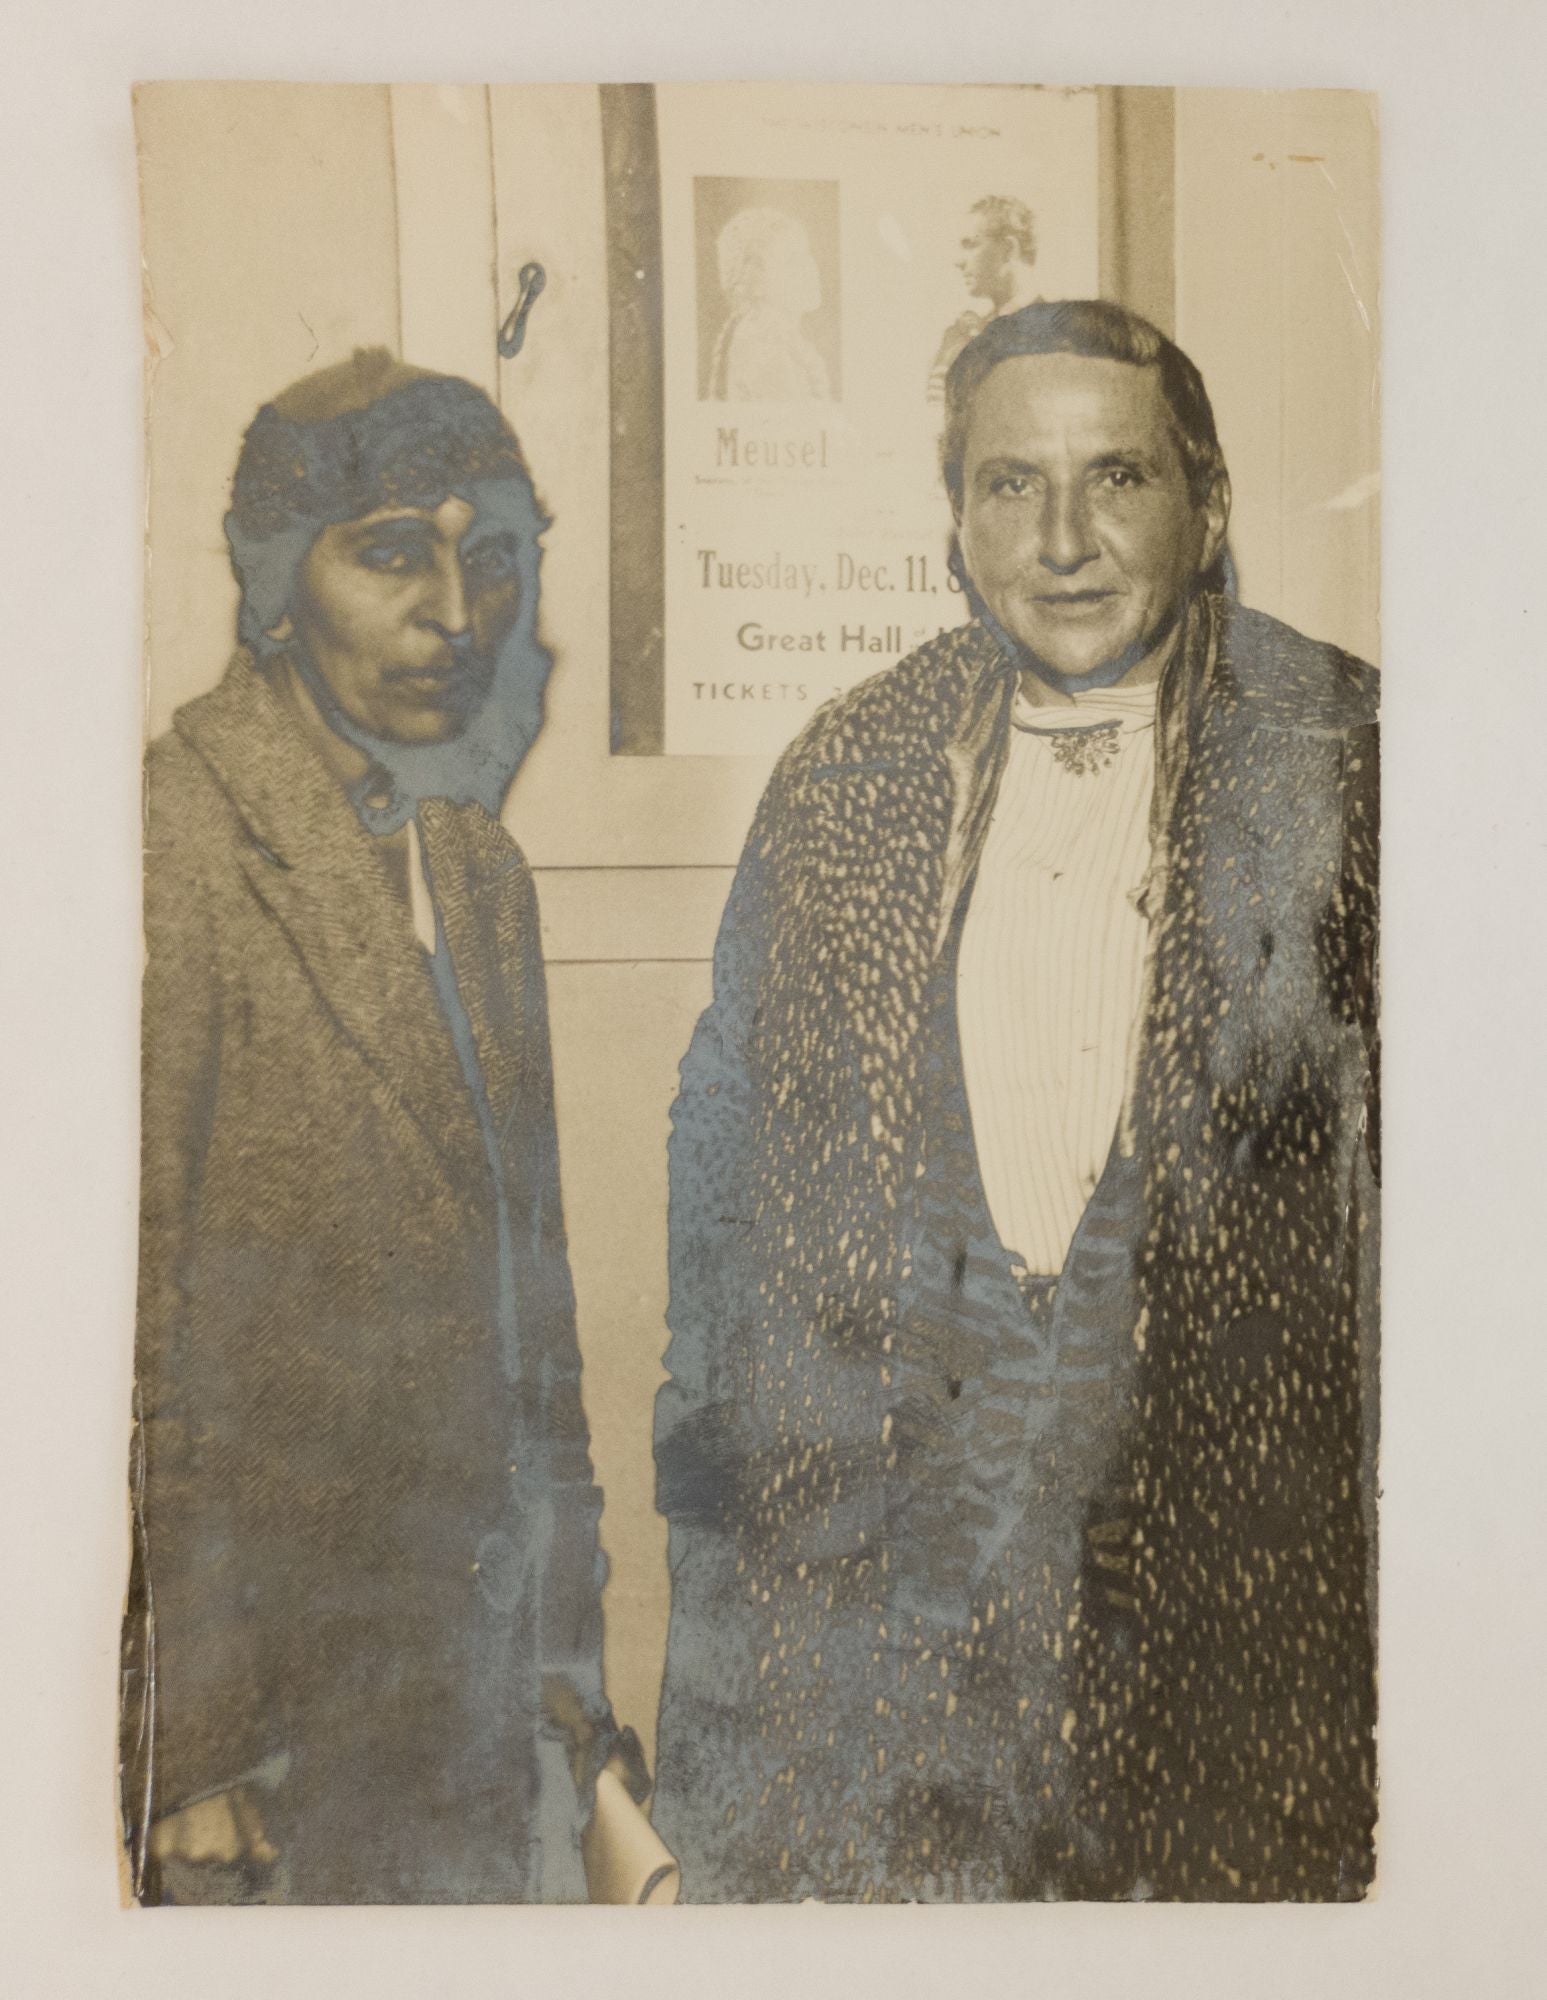 Product Image for THE AUTOBIOGRAPHY OF ALICE B. TOKLAS [Signed by Stein and Toklas]